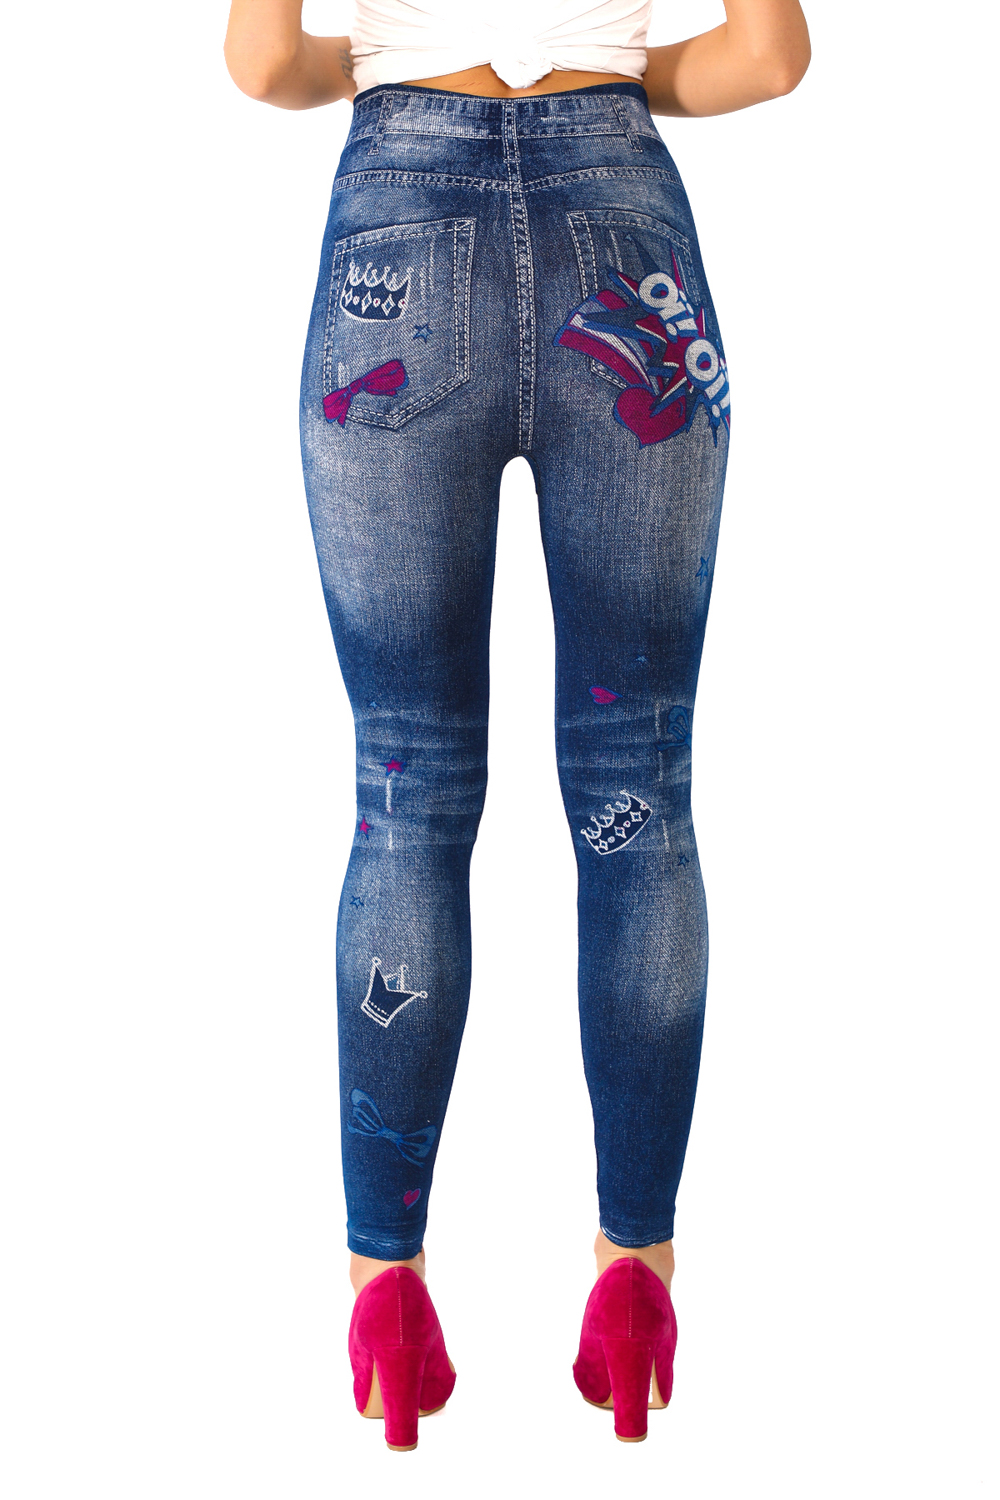 Denim Leggings with Colorful Ribbon and Heart Pattern - Its All Leggings